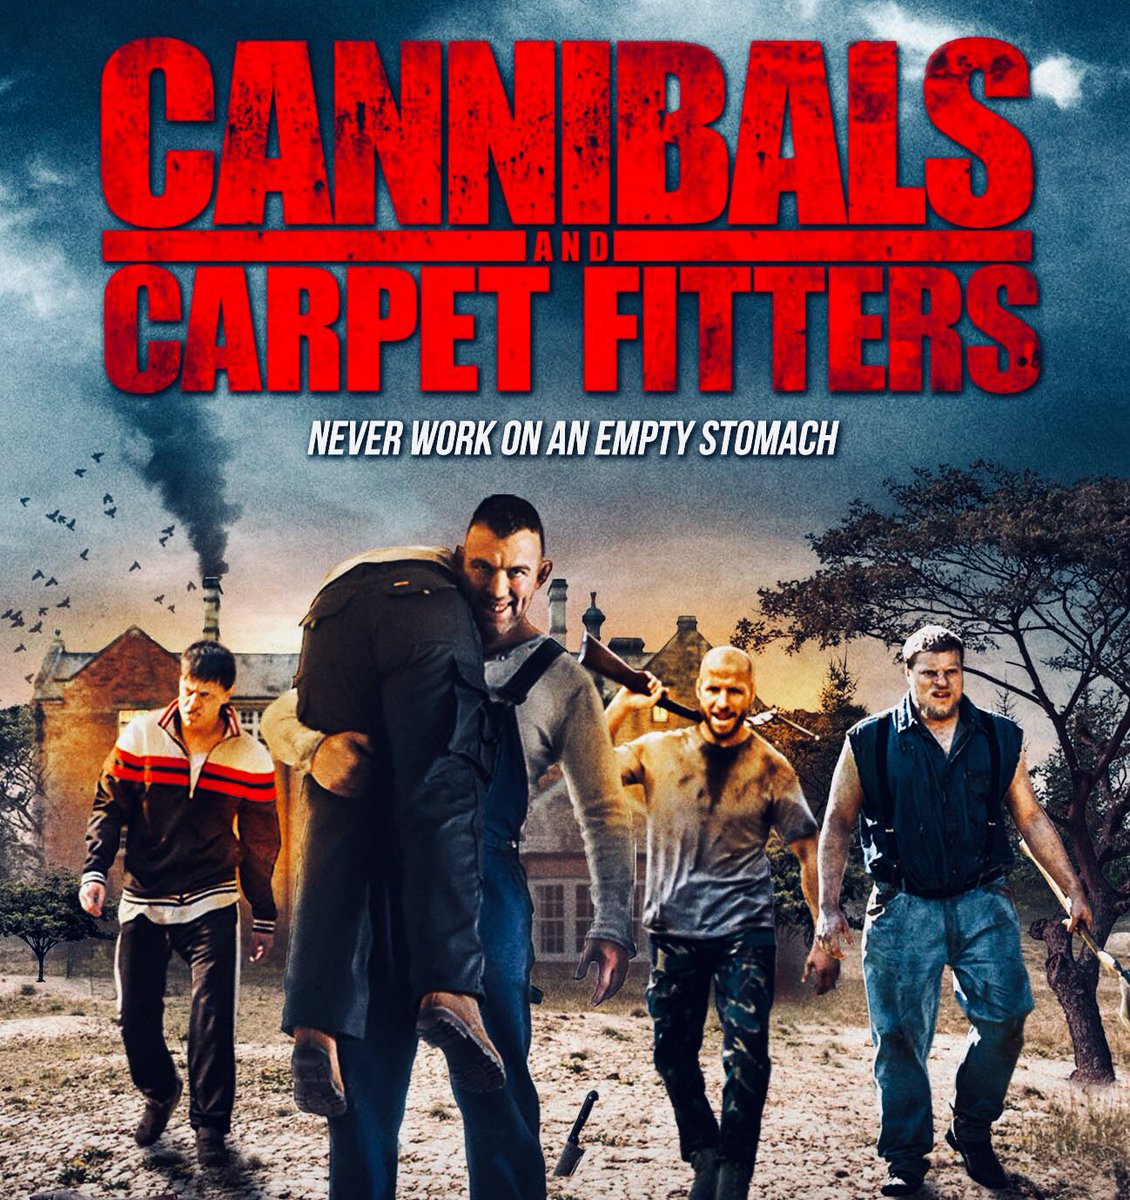 May 6th 2019 the Cannibals are coming! DVD & VOD #ukrelease #horror #comedy #comingsoon